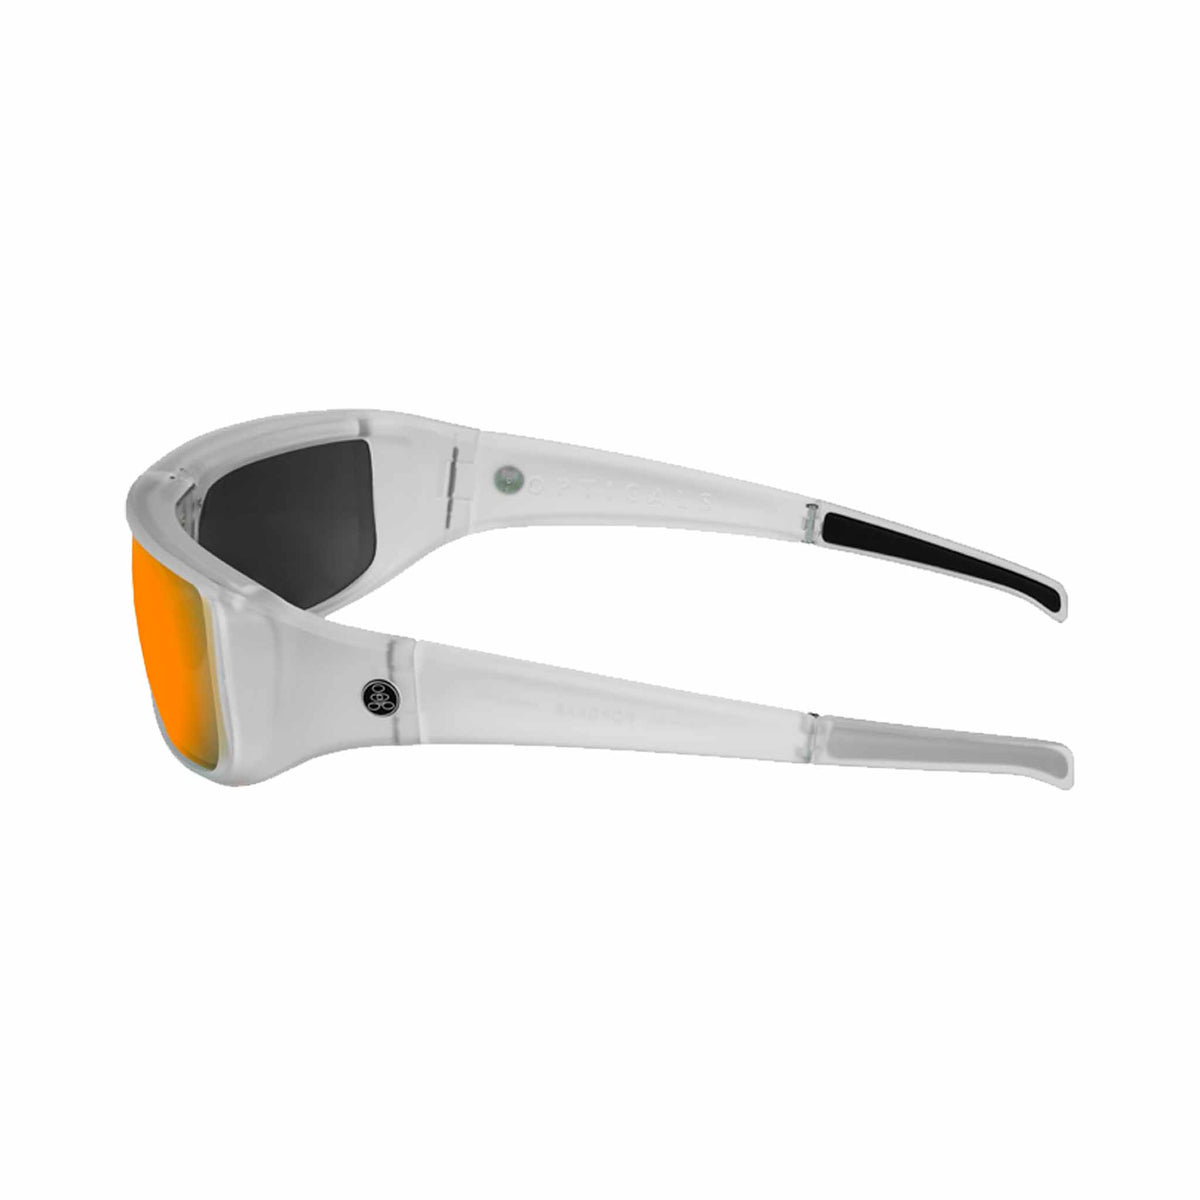 Popticals, Premium Compact Sunglasses, PopGear, 010050-XYOO, Standard Sunglasses, Matte Crystal Frame, Gray Lenses with Orange Mirror Finish, Side View